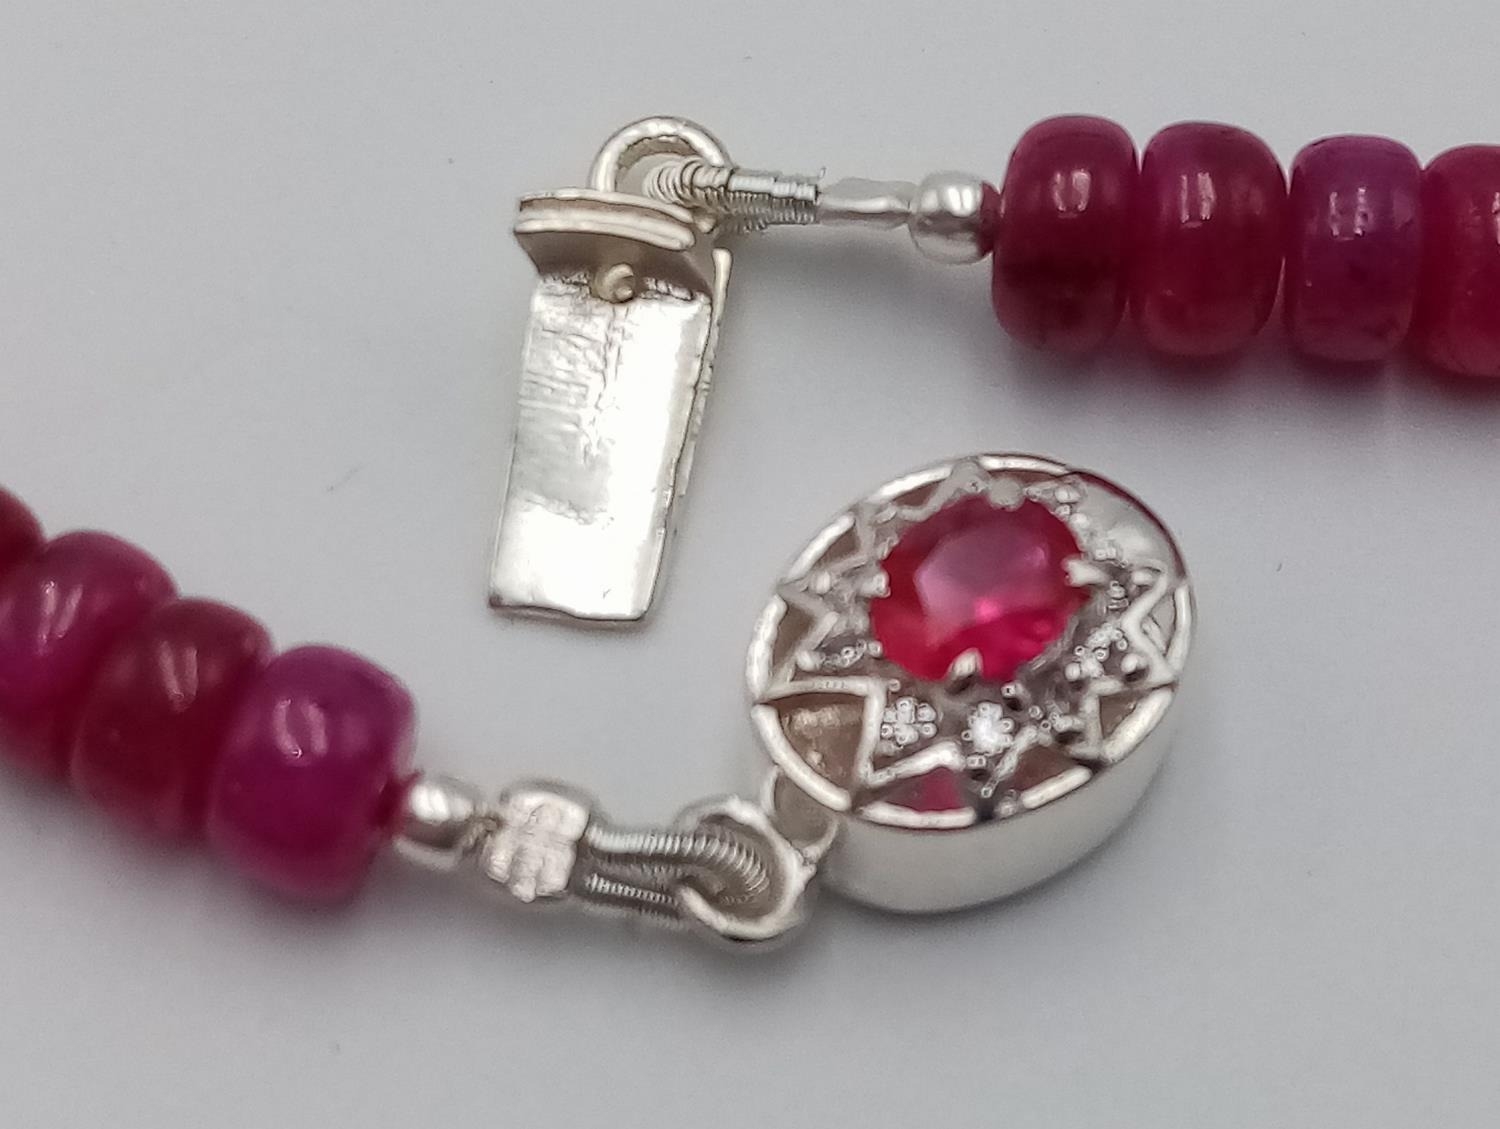 A 150ctw Ruby Rondelle Necklace with Ruby and 925 Silver Clasp. 40cm length. Ref: CD-1274 - Image 3 of 4